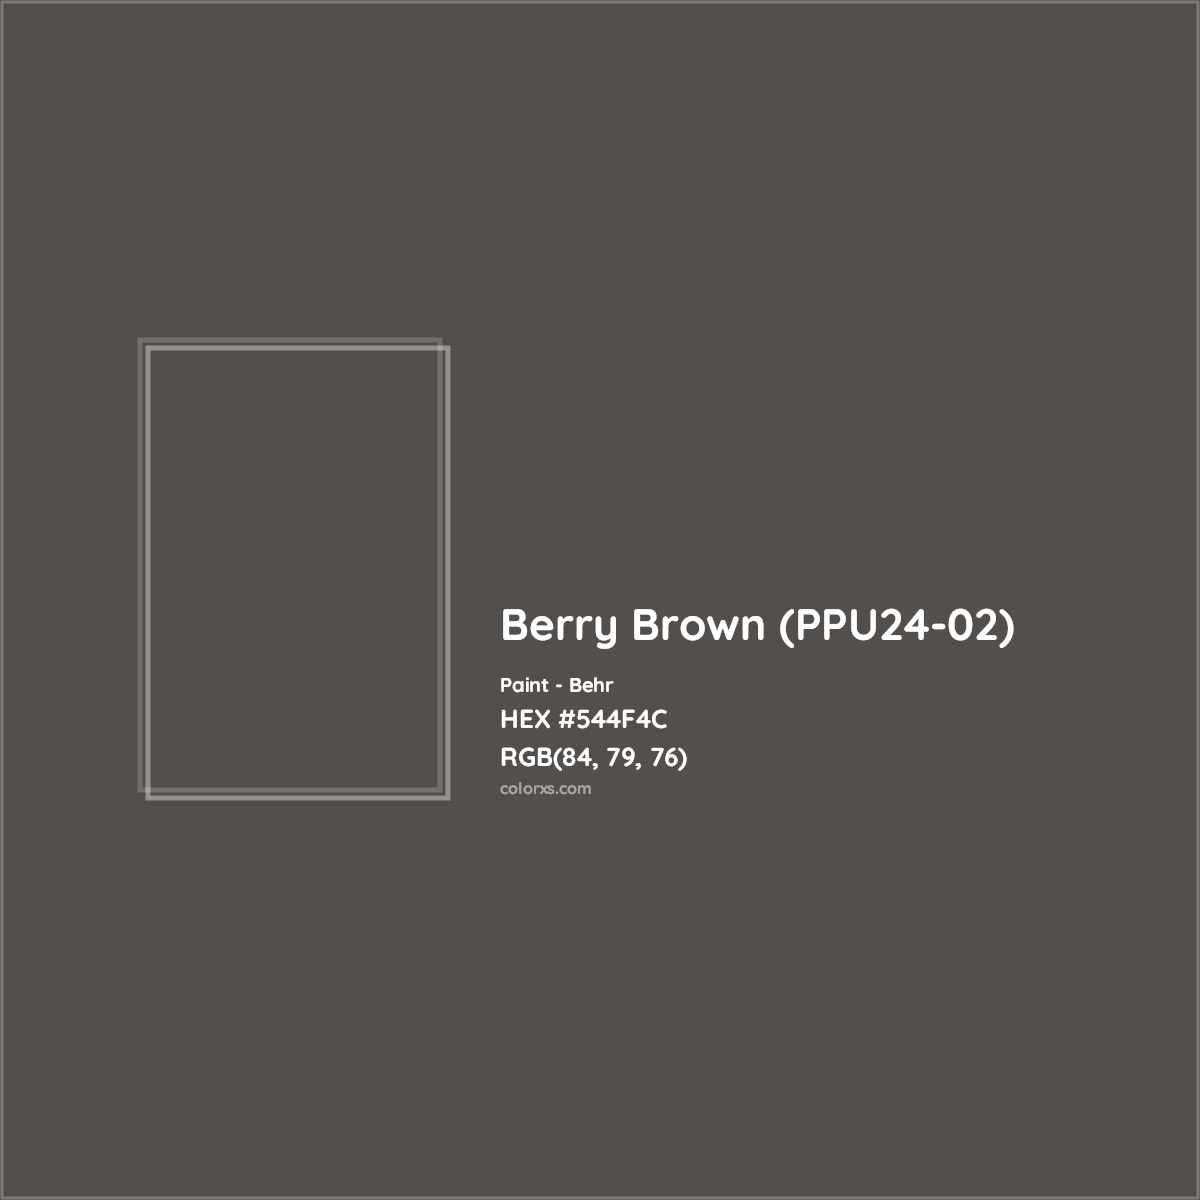 HEX #544F4C Berry Brown (PPU24-02) Paint Behr - Color Code